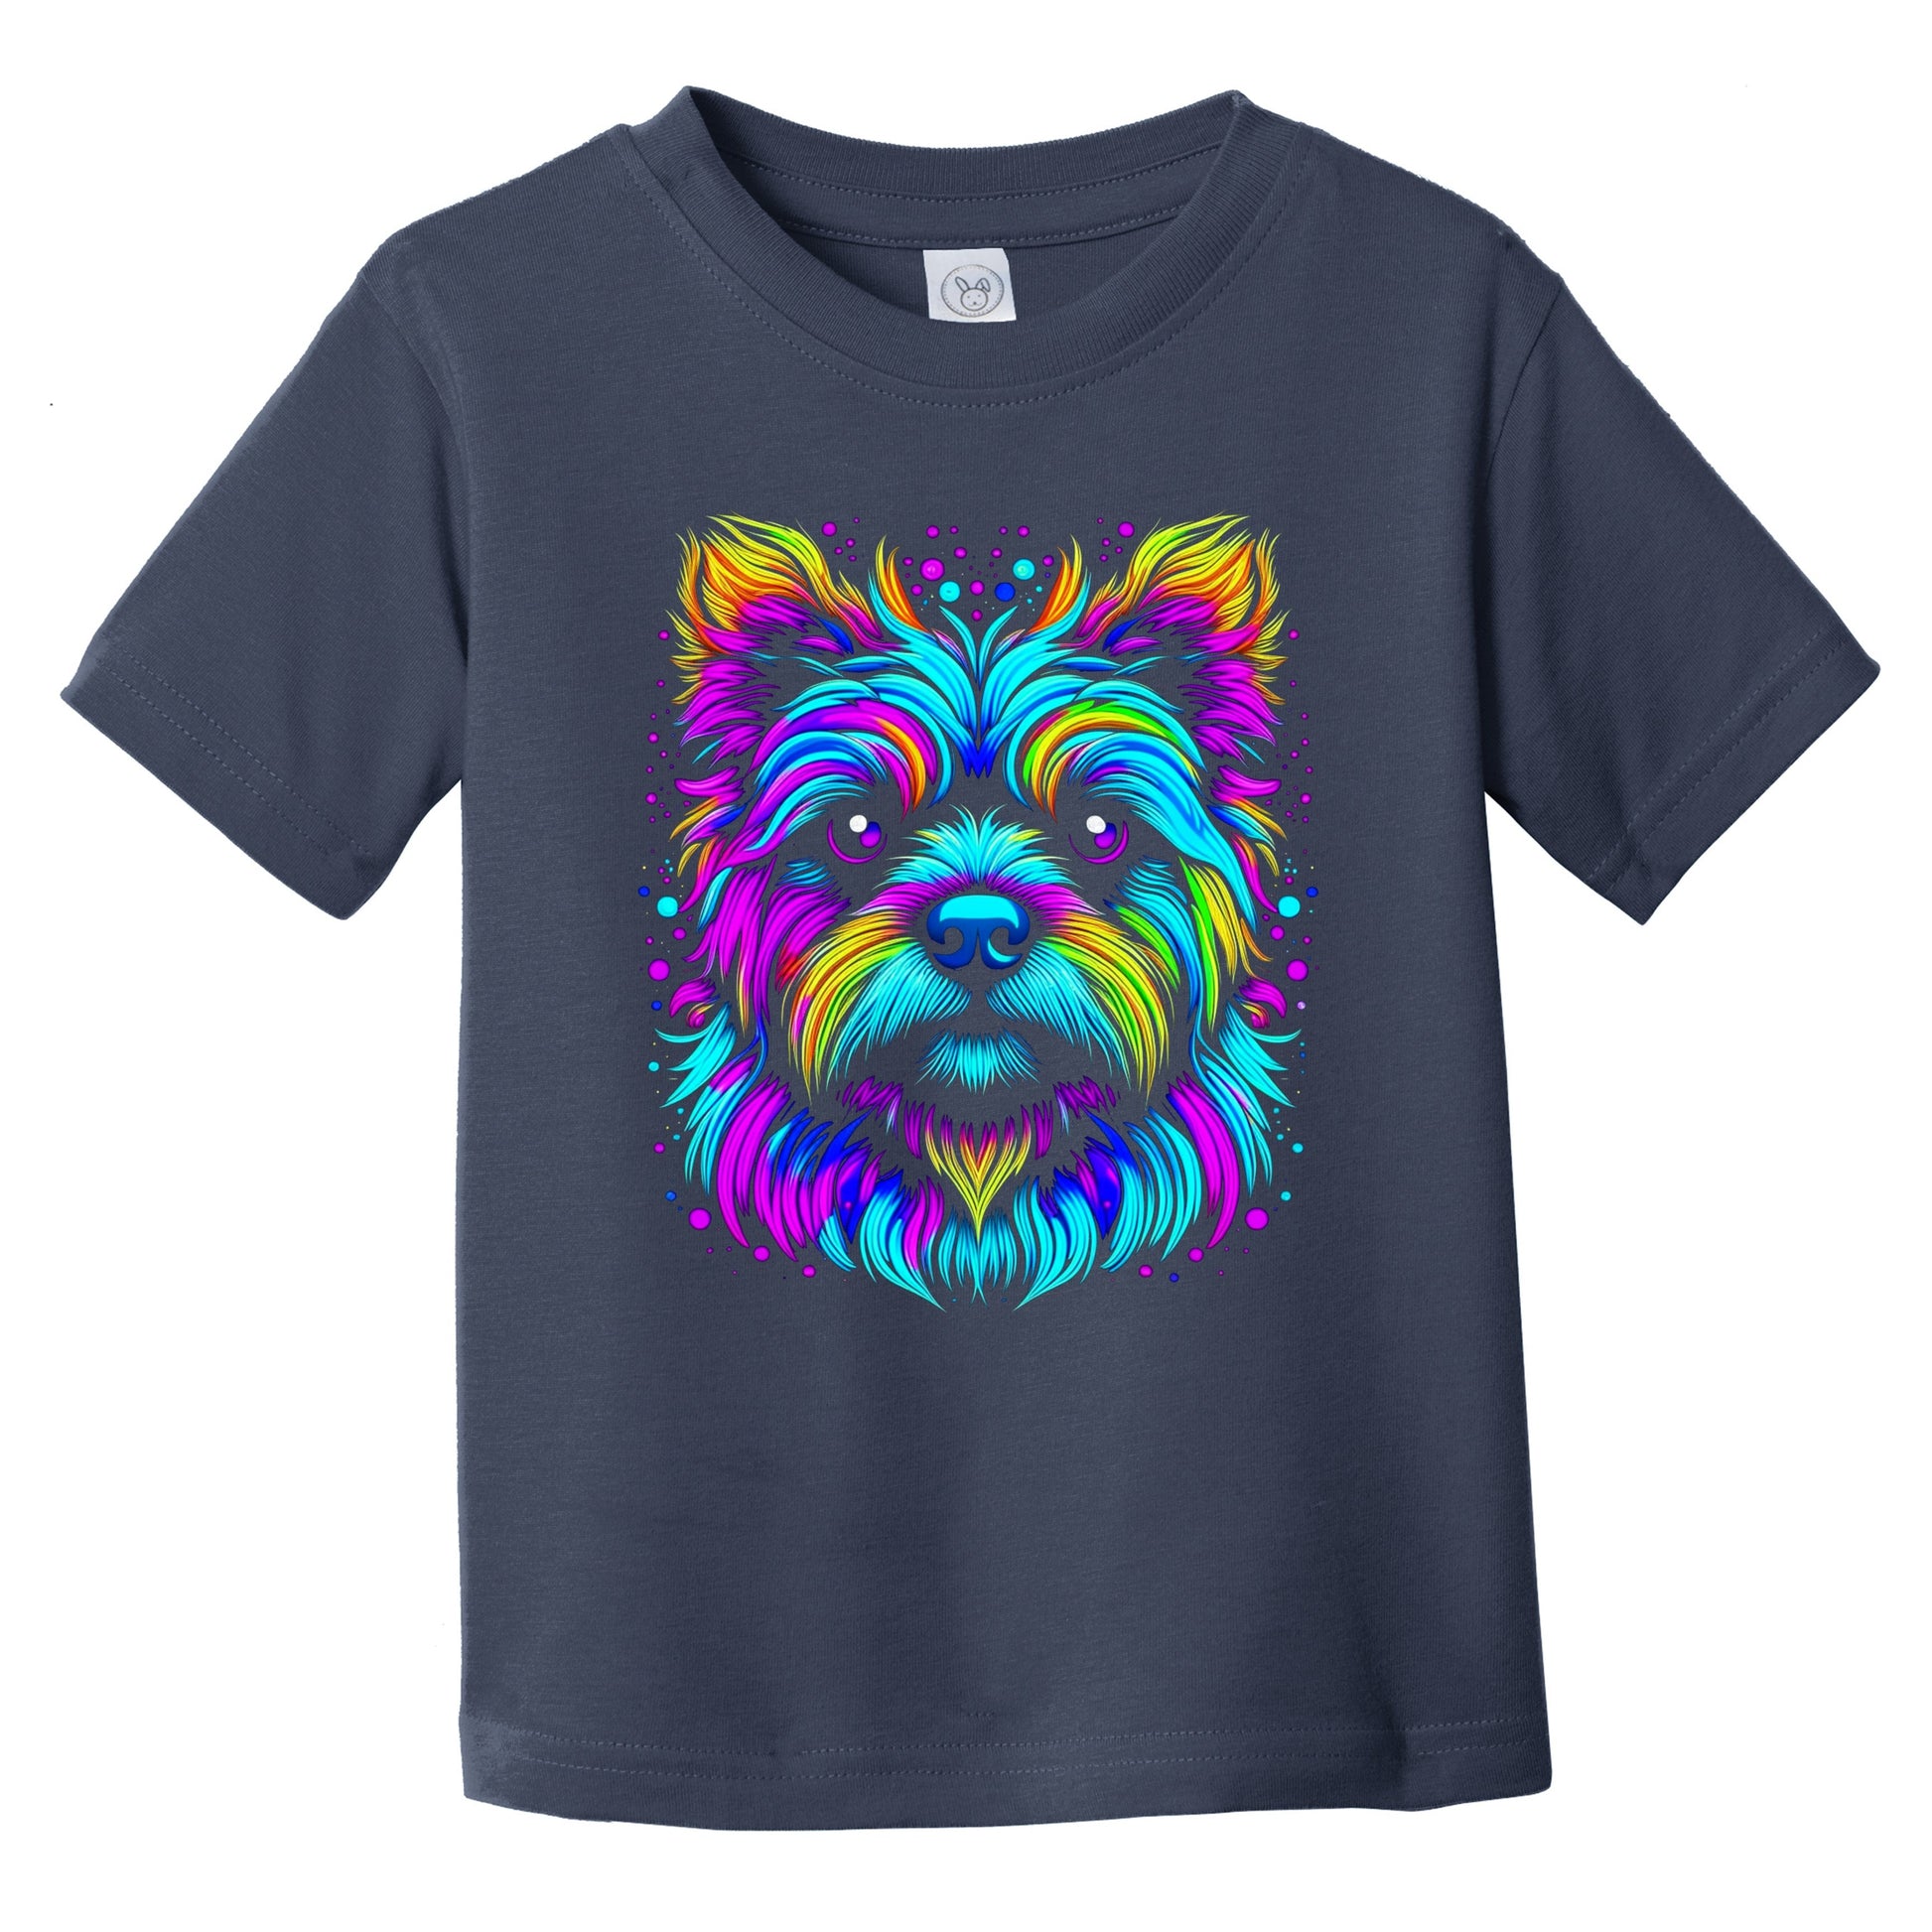 Colorful Bright Yorkshire Terrier Vibrant Psychedelic Art Infant Toddler T-Shirt